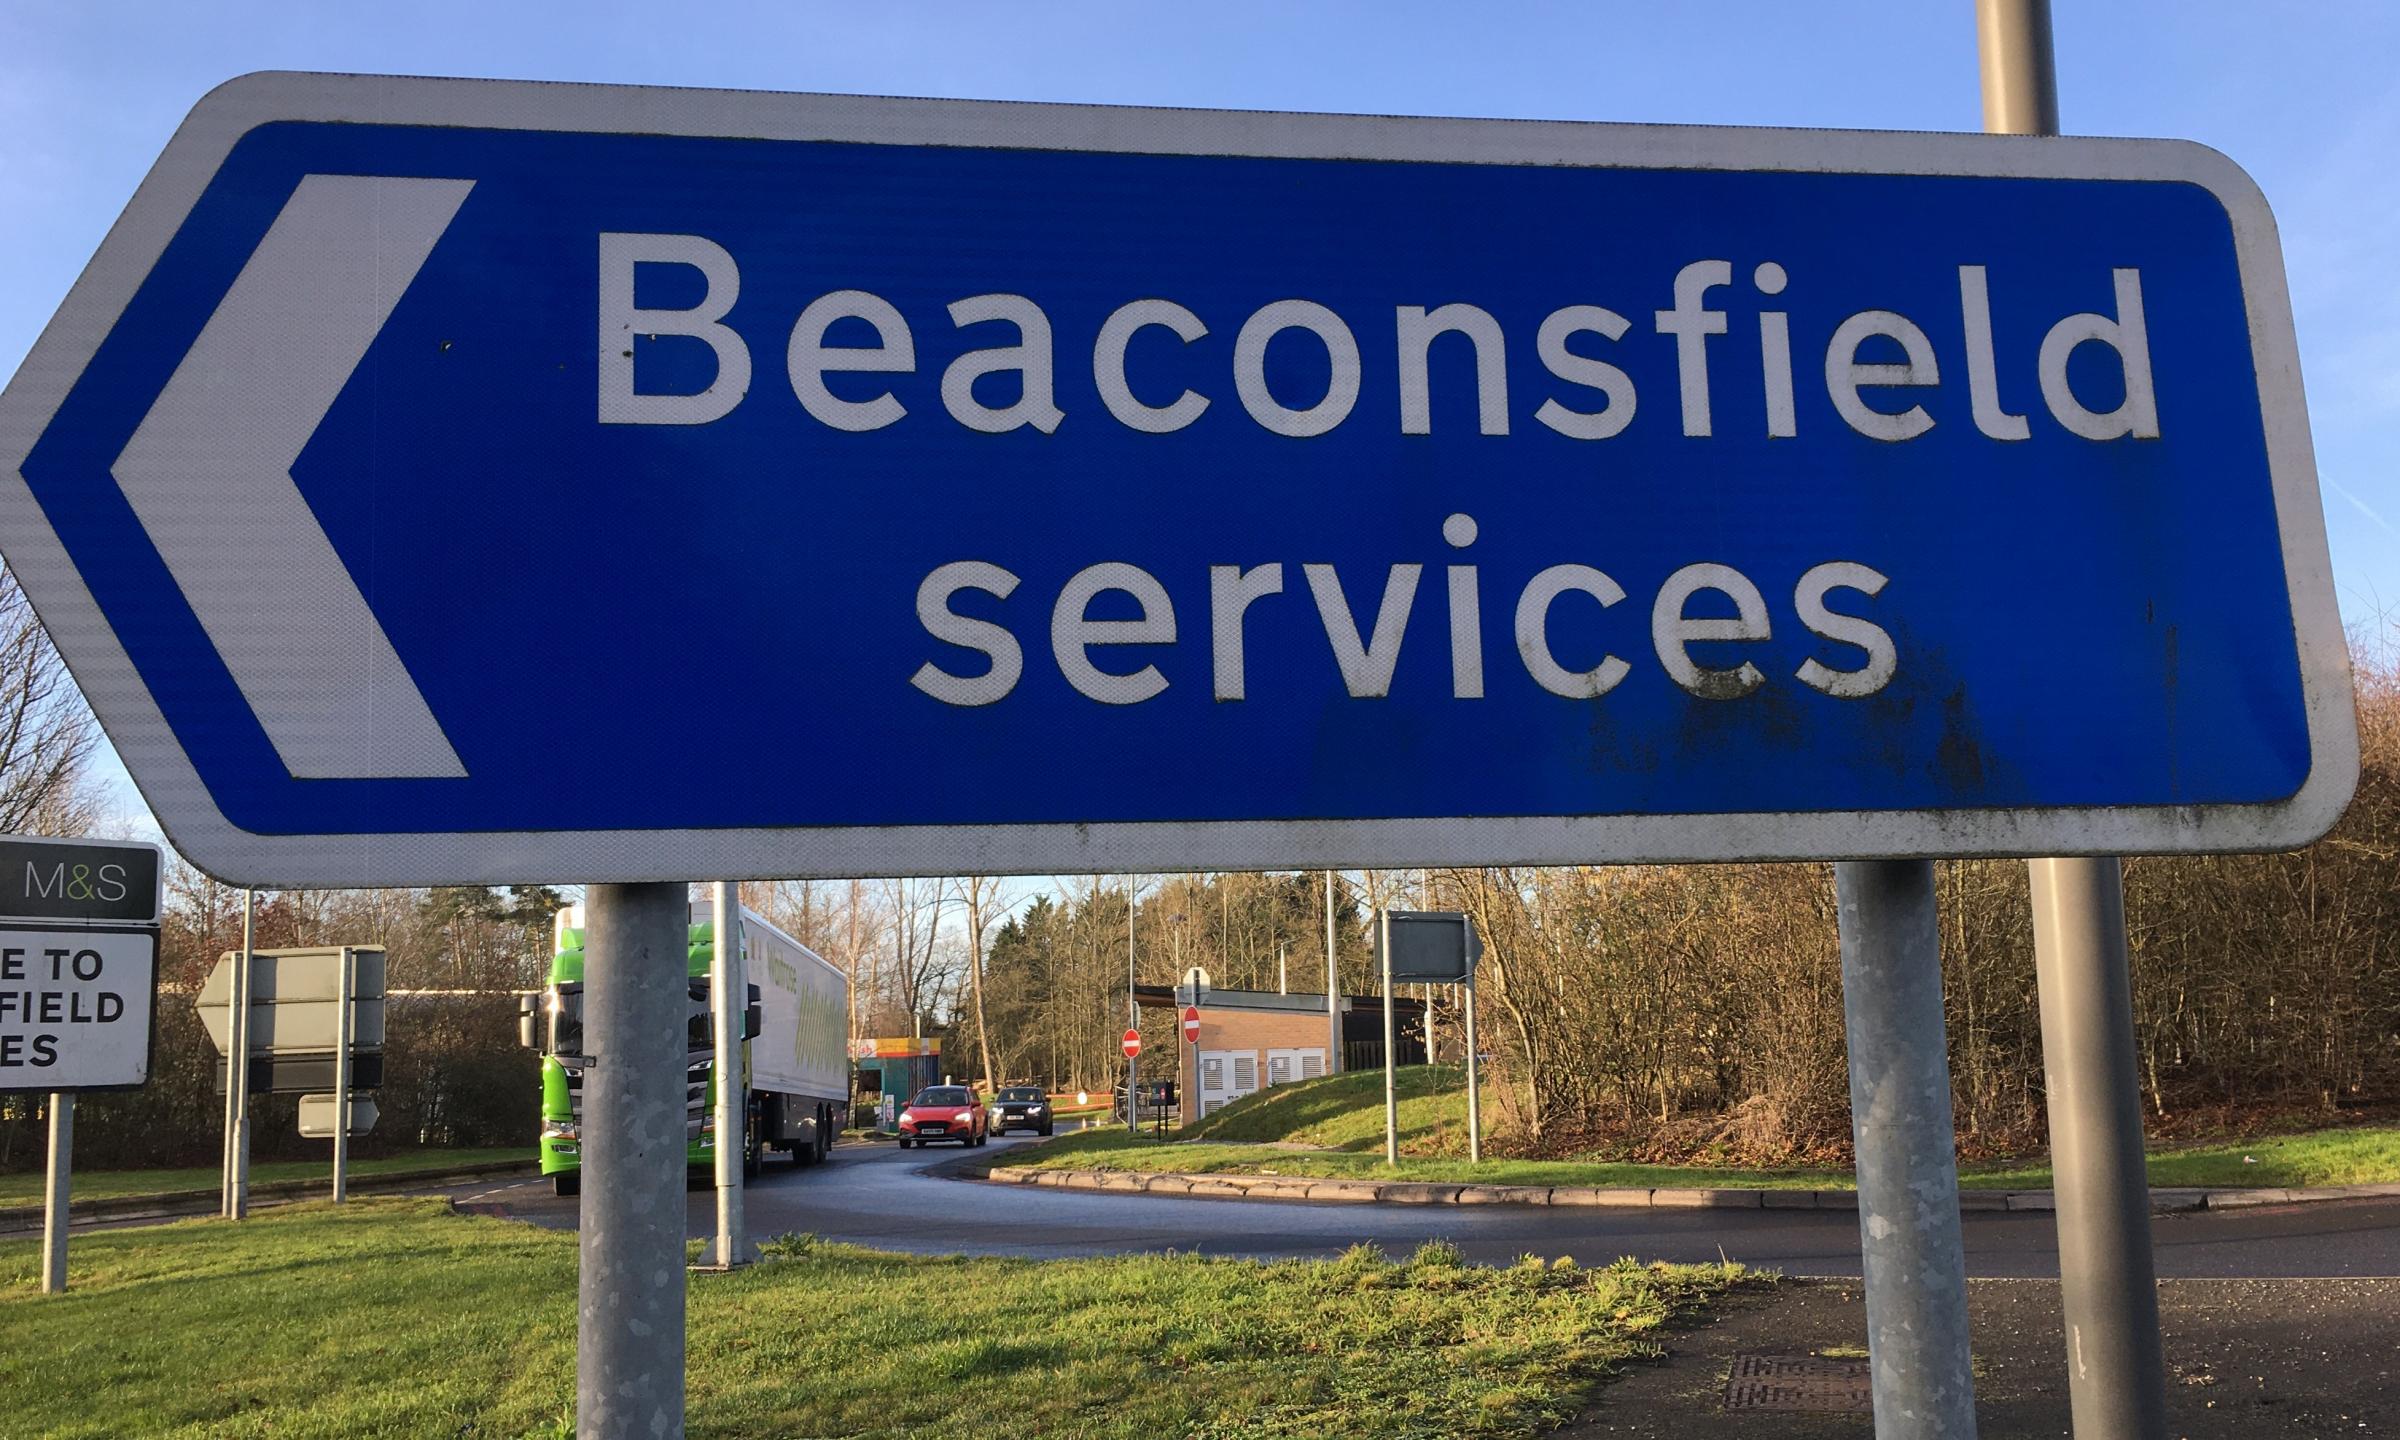 Many people who go to the services are not aware that BTFC are just down the road 